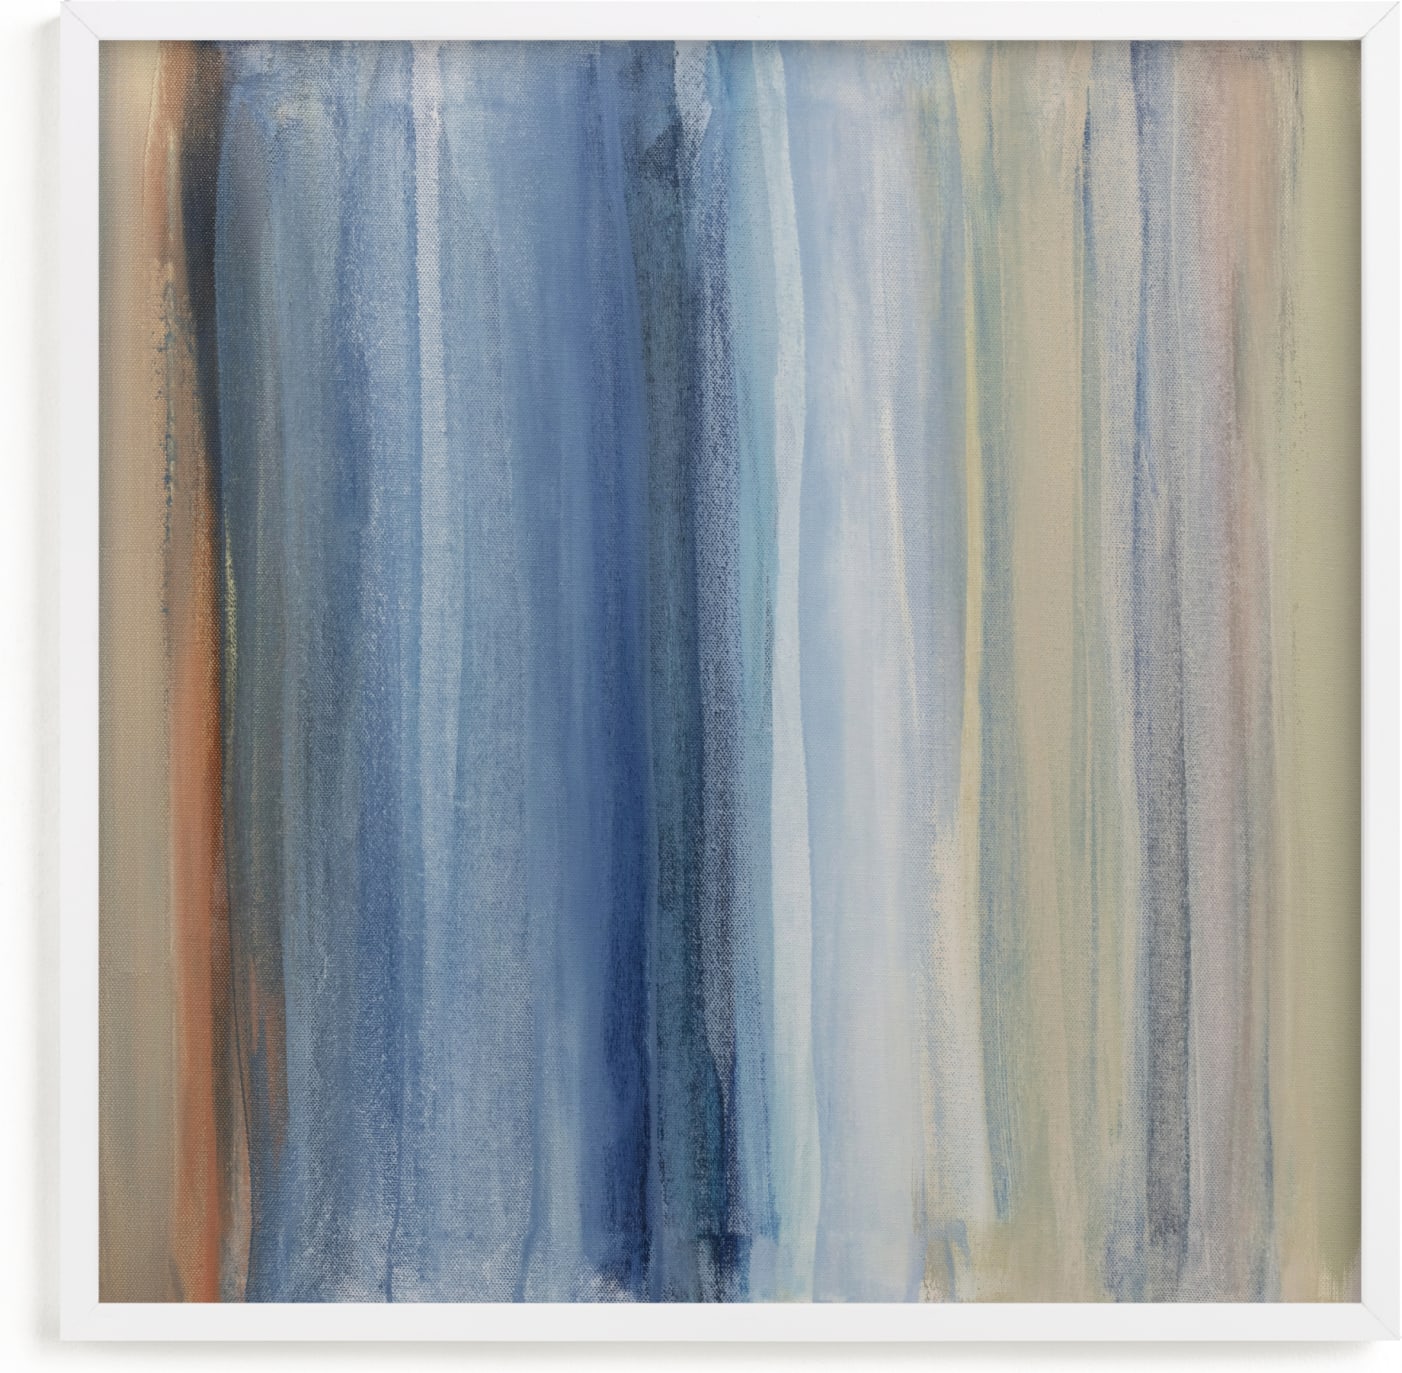 This is a blue art by Teodora Guererra called Nantucket Stripes 2.